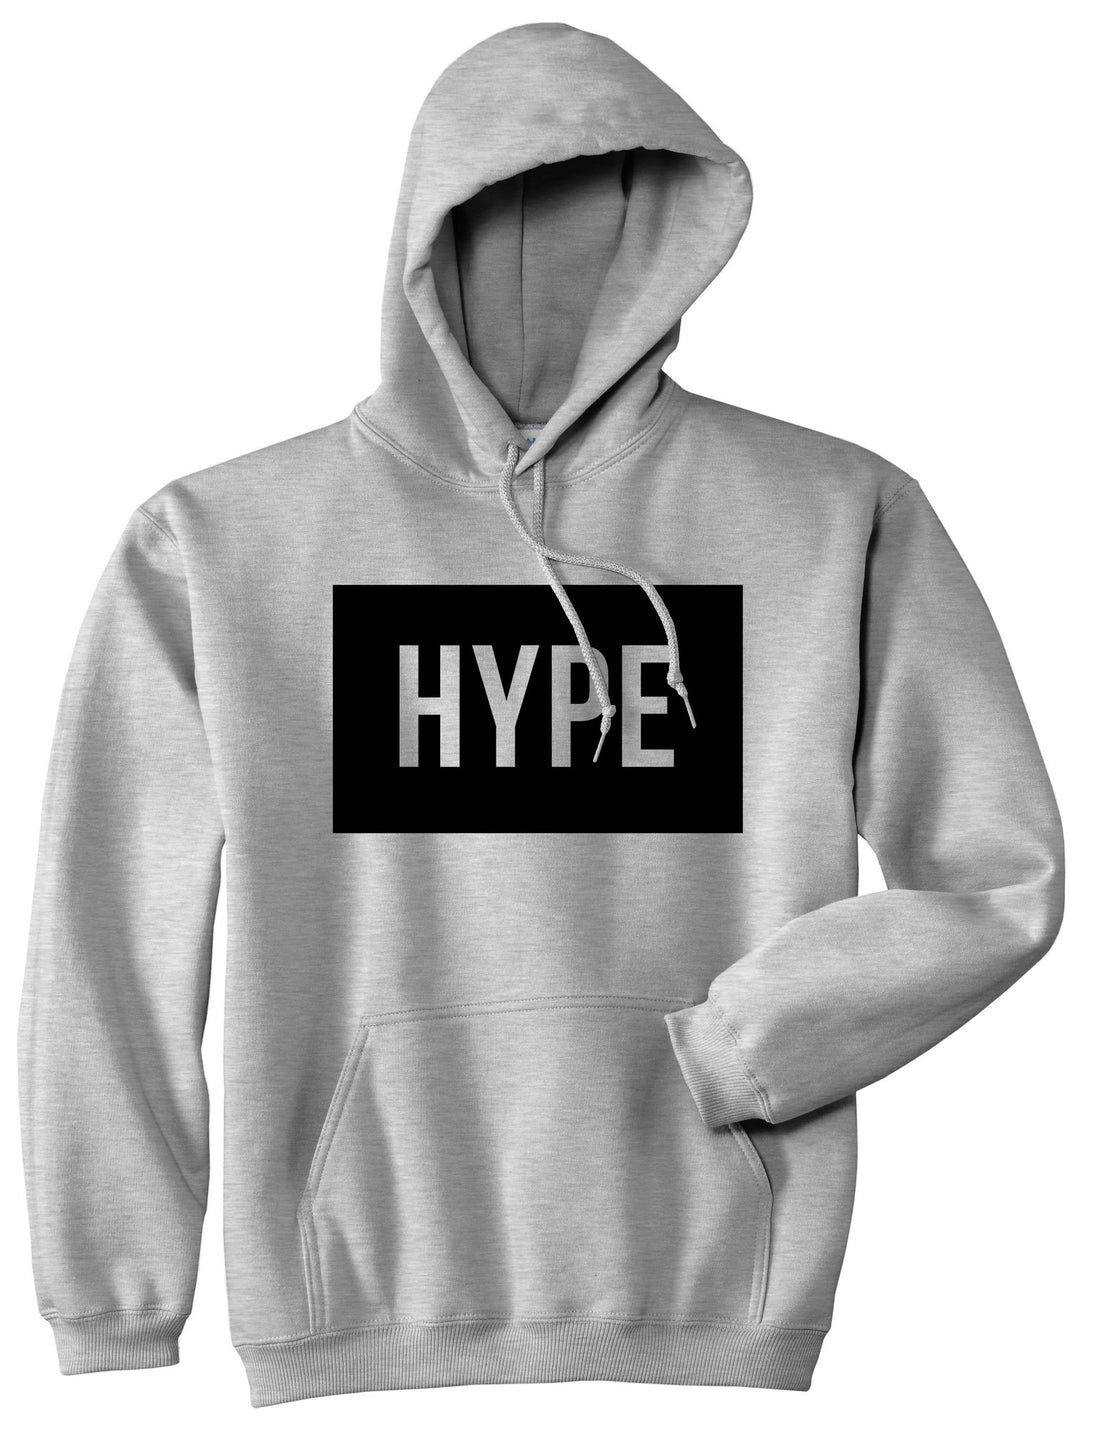 Hype Style Streetwear Brand Logo White by Kings Of NY Boys Kids Pullover Hoodie Hoody In Grey by Kings Of NY